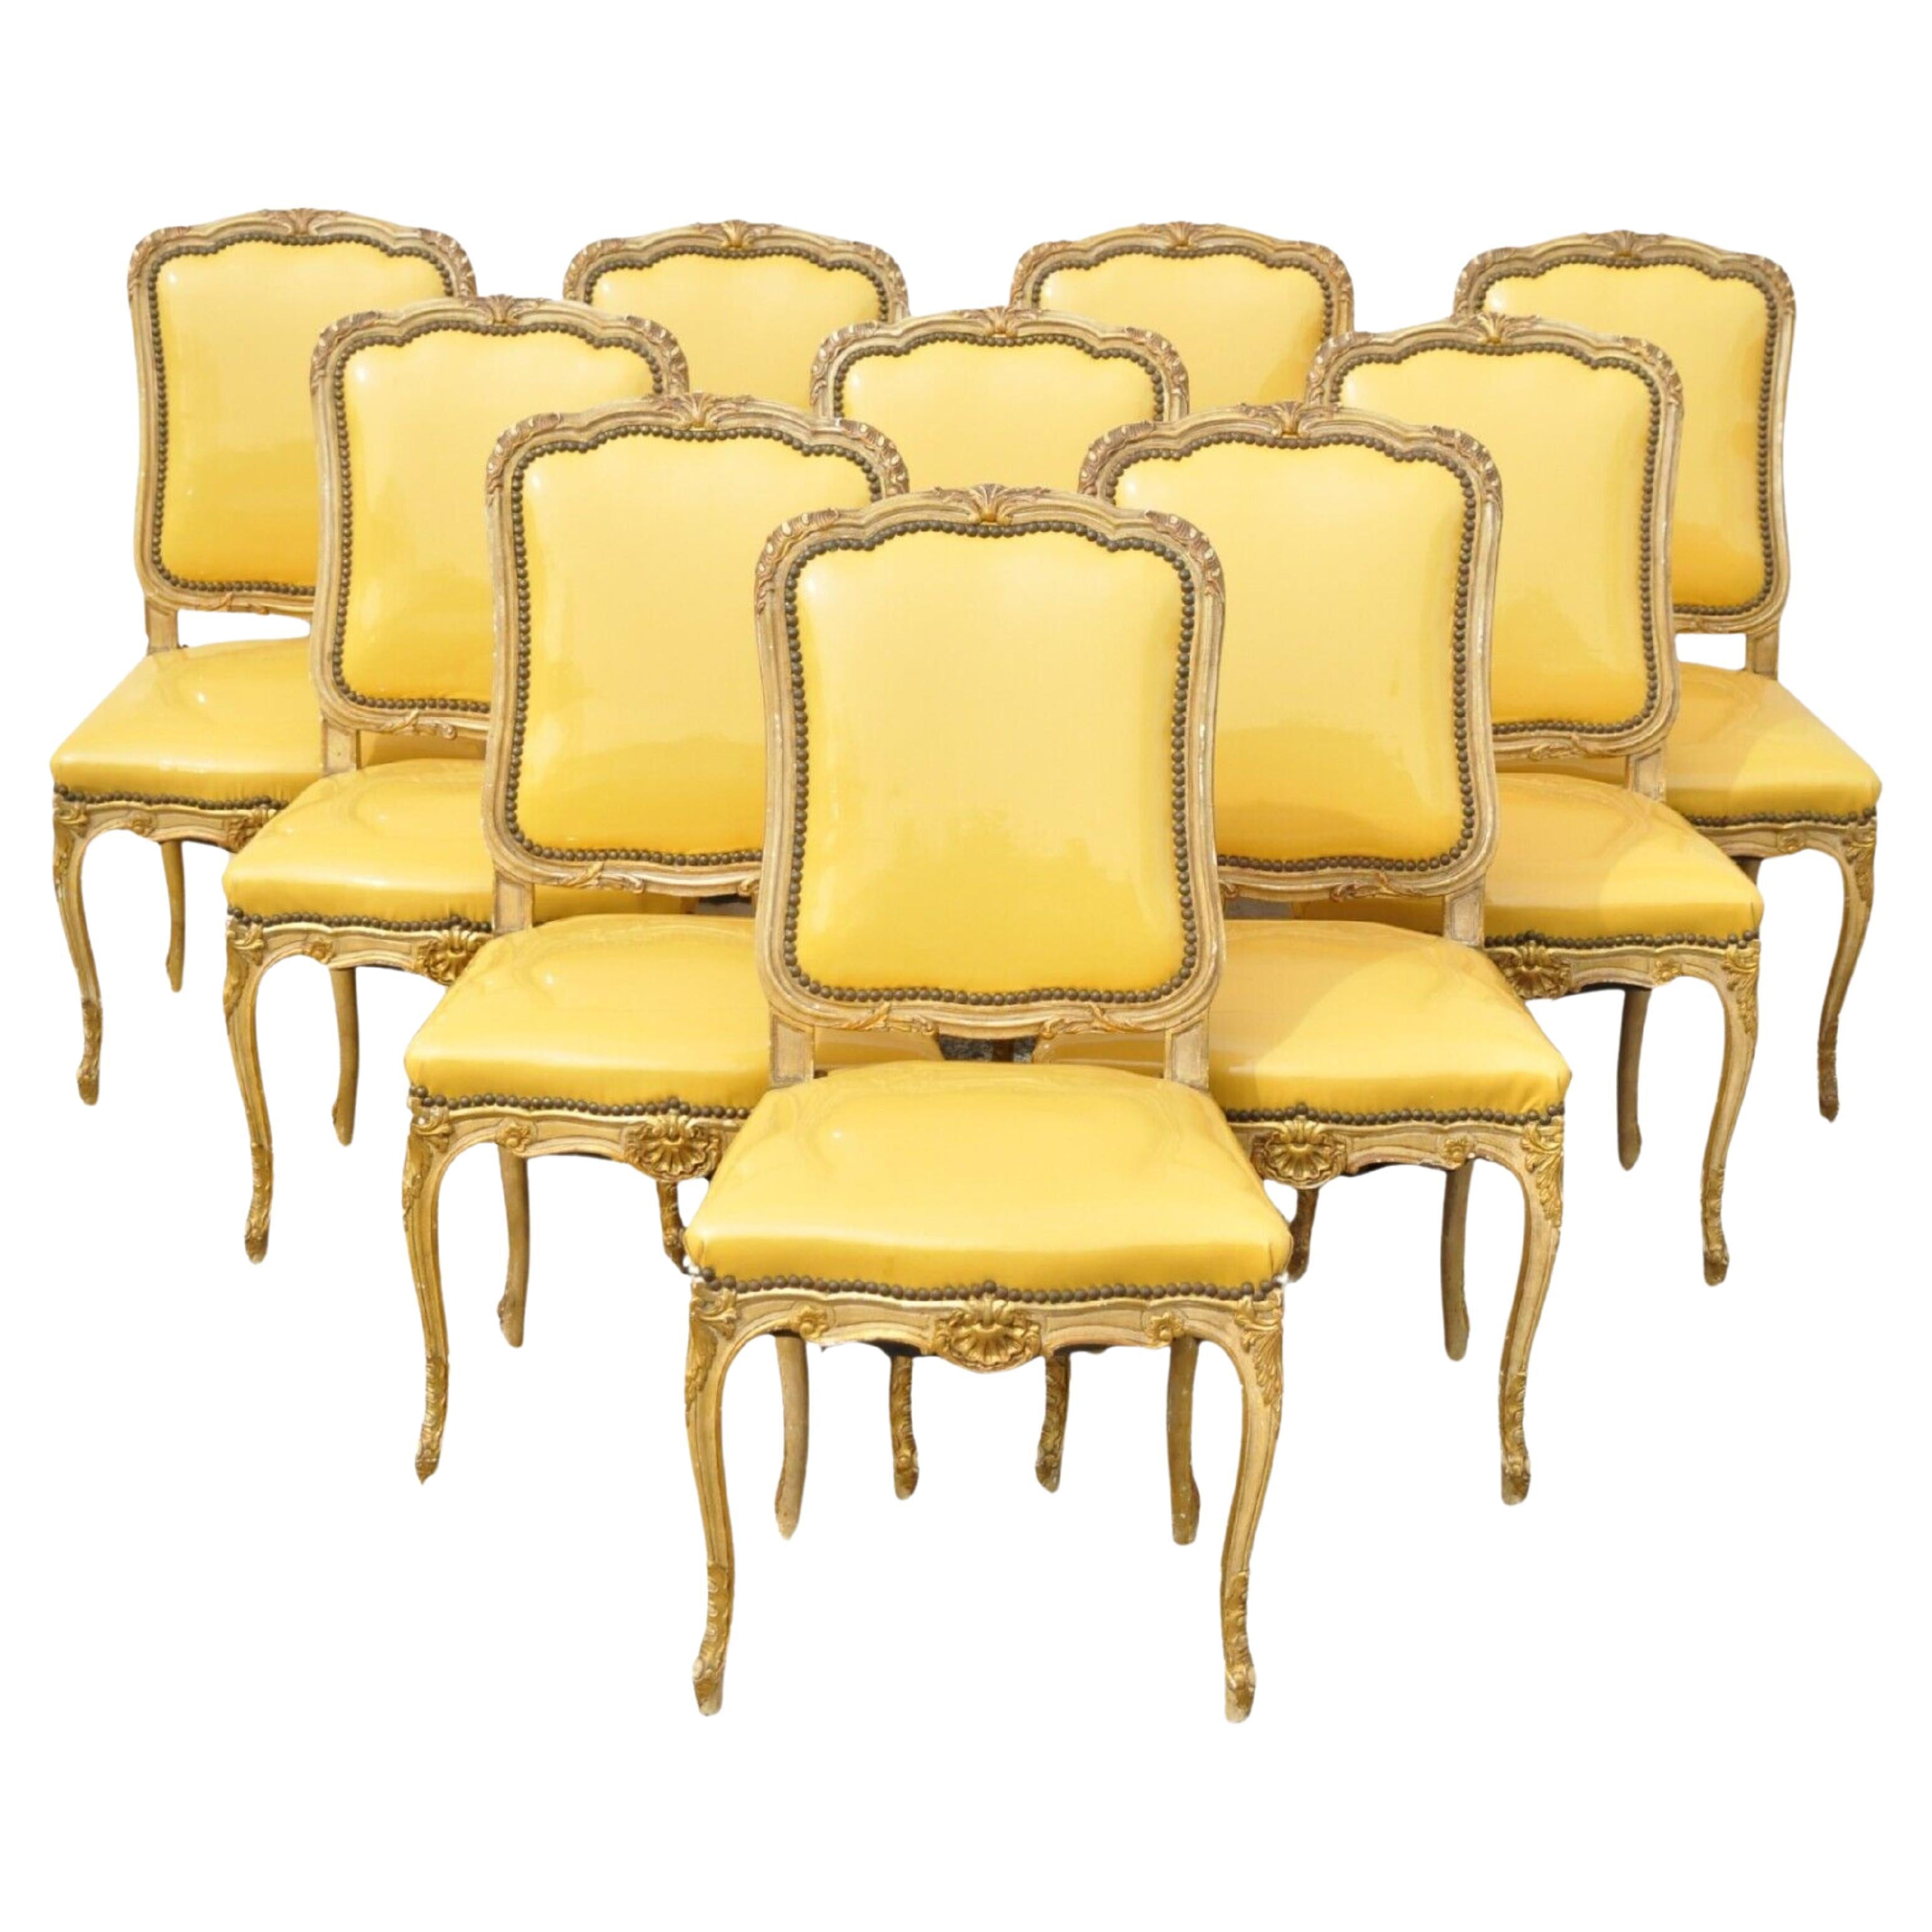 Vintage French Louis XV Style Parcel Gilt Carved Dining Side Chairs - Set of 10 For Sale